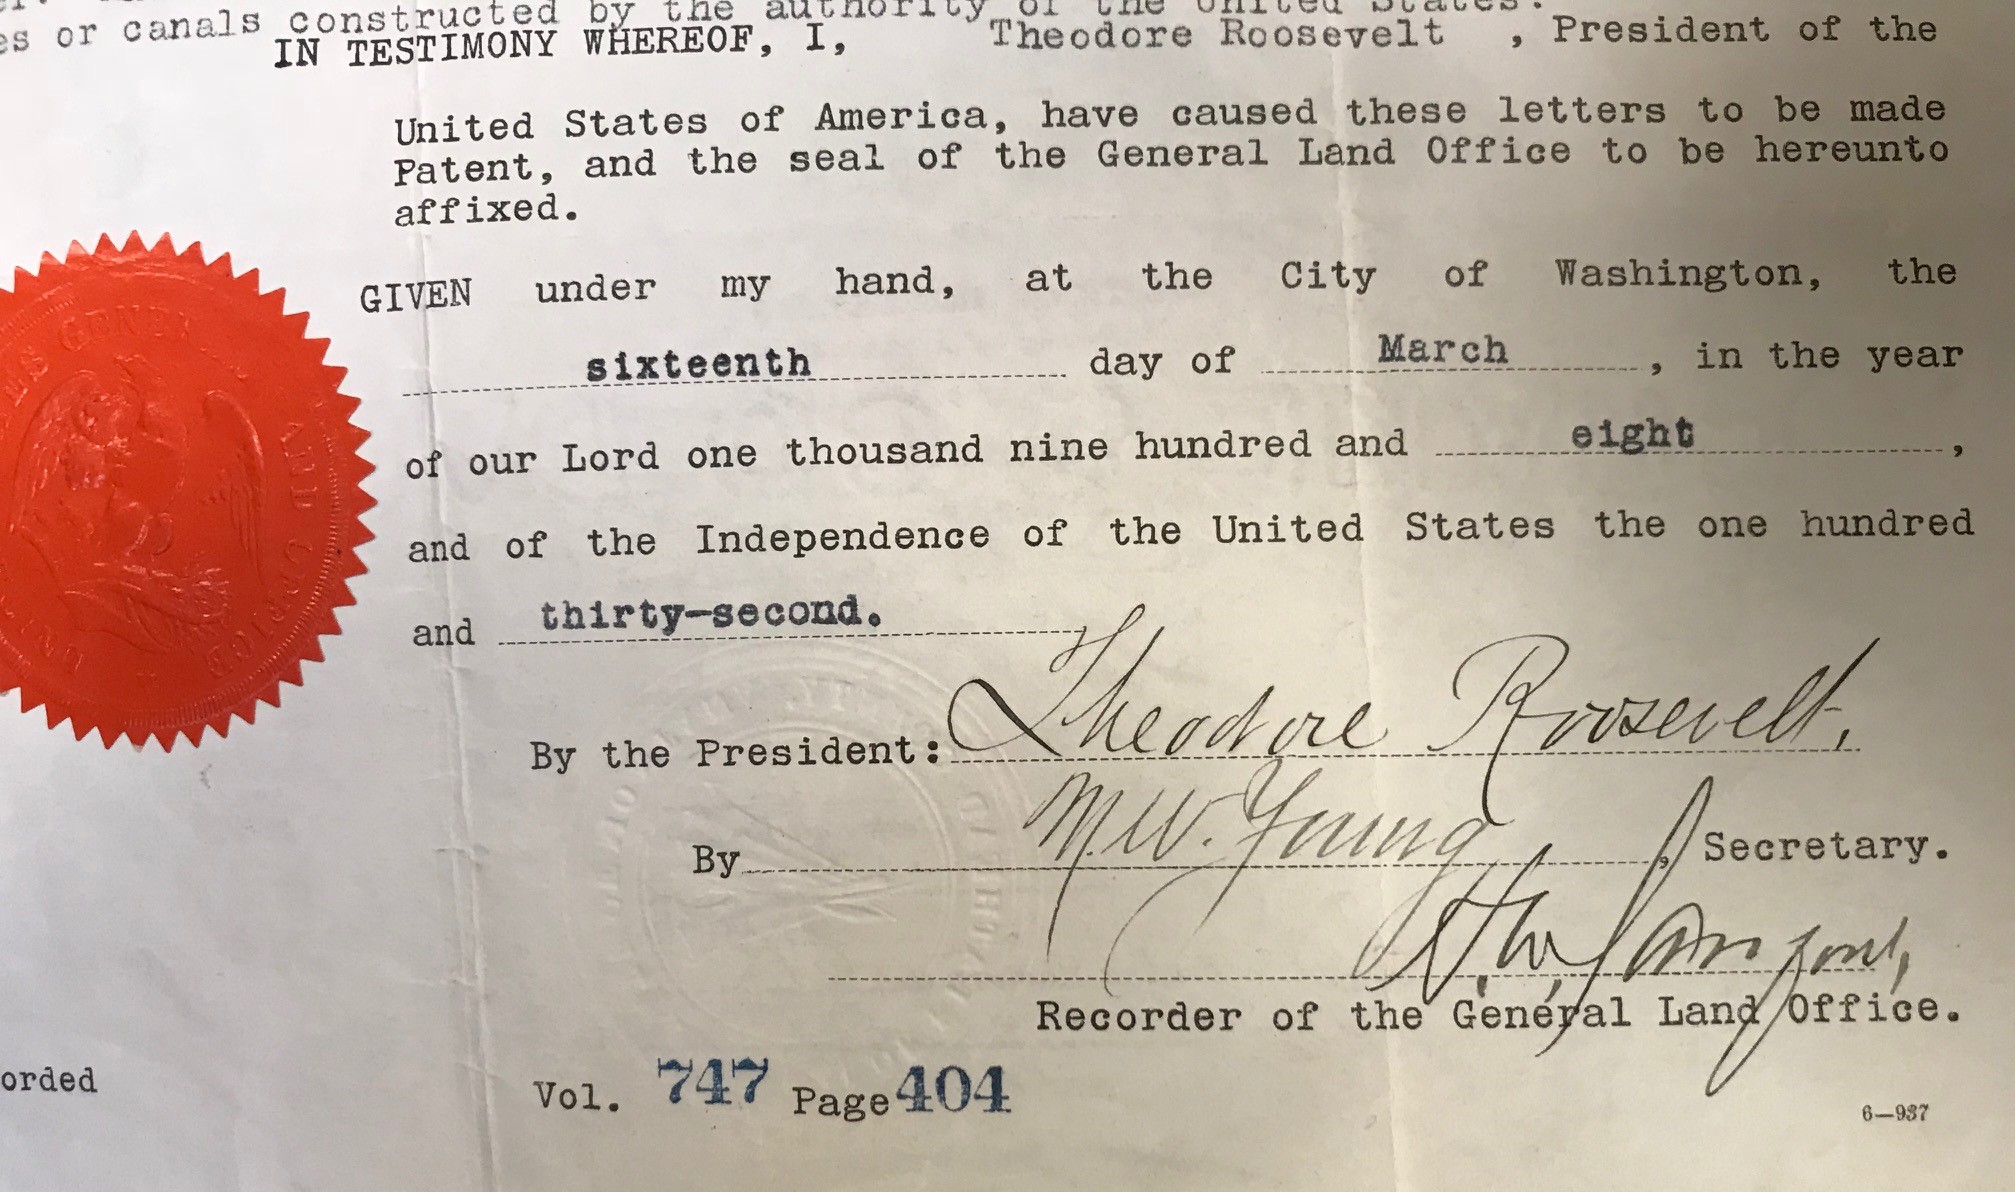 President Theodore Roosevelt signed a land patent providing land near the Grand Canyon Forest Reserve to the Santa Fe Pacific Railroad Company – a holding company for the ATSF – on March 16, 1908.